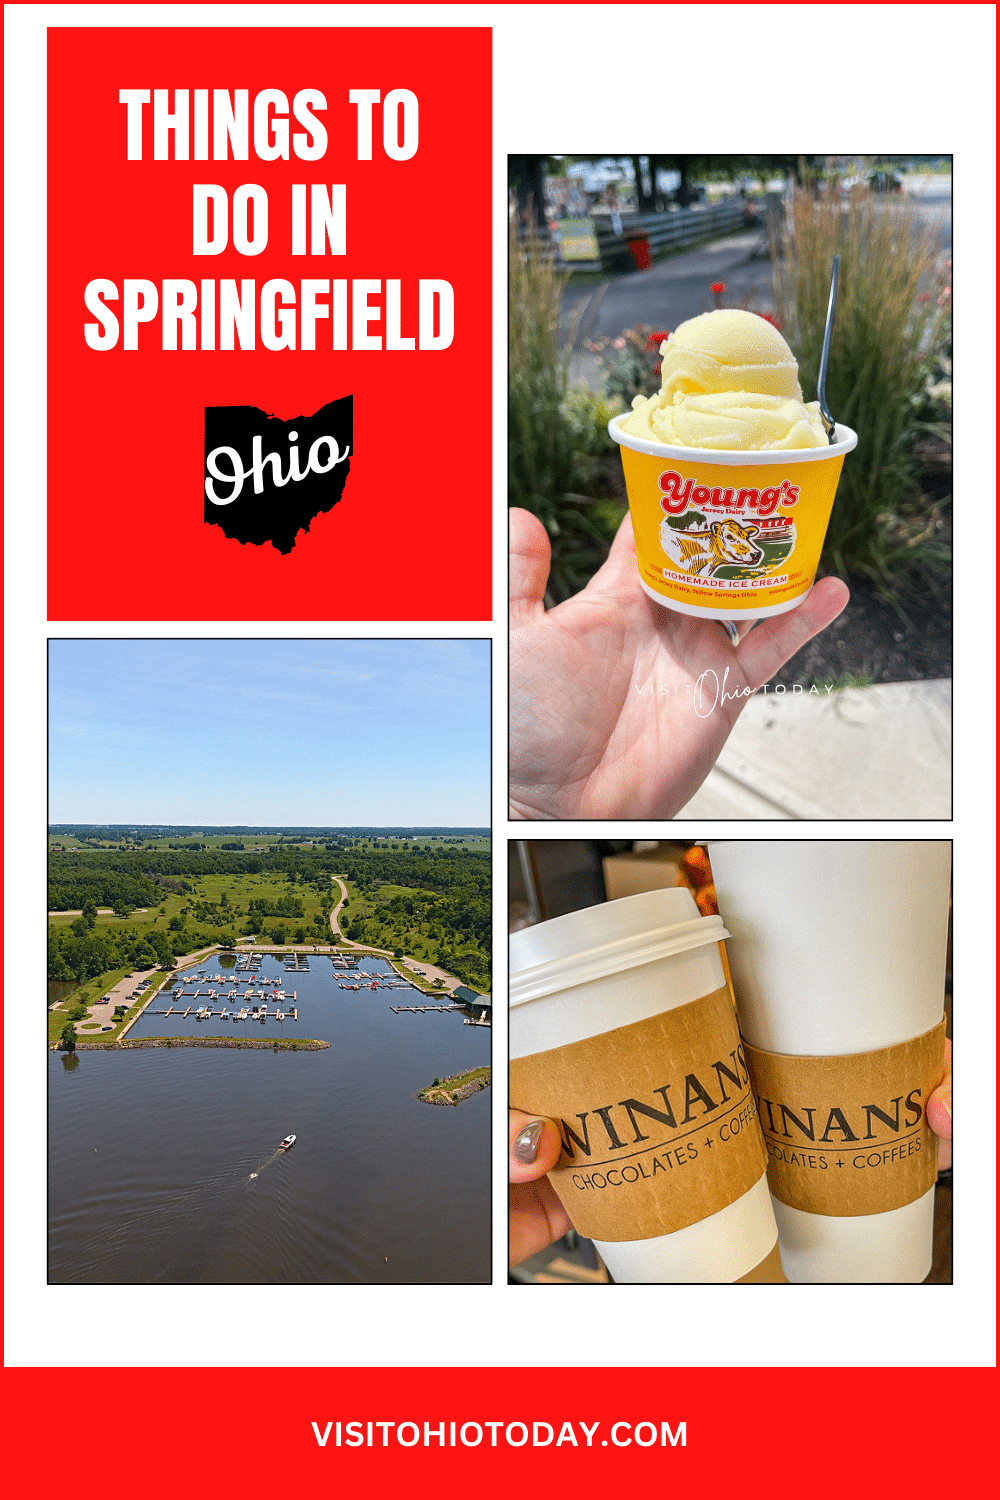 Springfield Ohio is in Clark County, in the southwest of Ohio. The city of Springfield has a population of a little fewer than 60,000. This charming town has a fantastic history and it is a gem of a place to visit. There are a lot of things to do in Springfield!